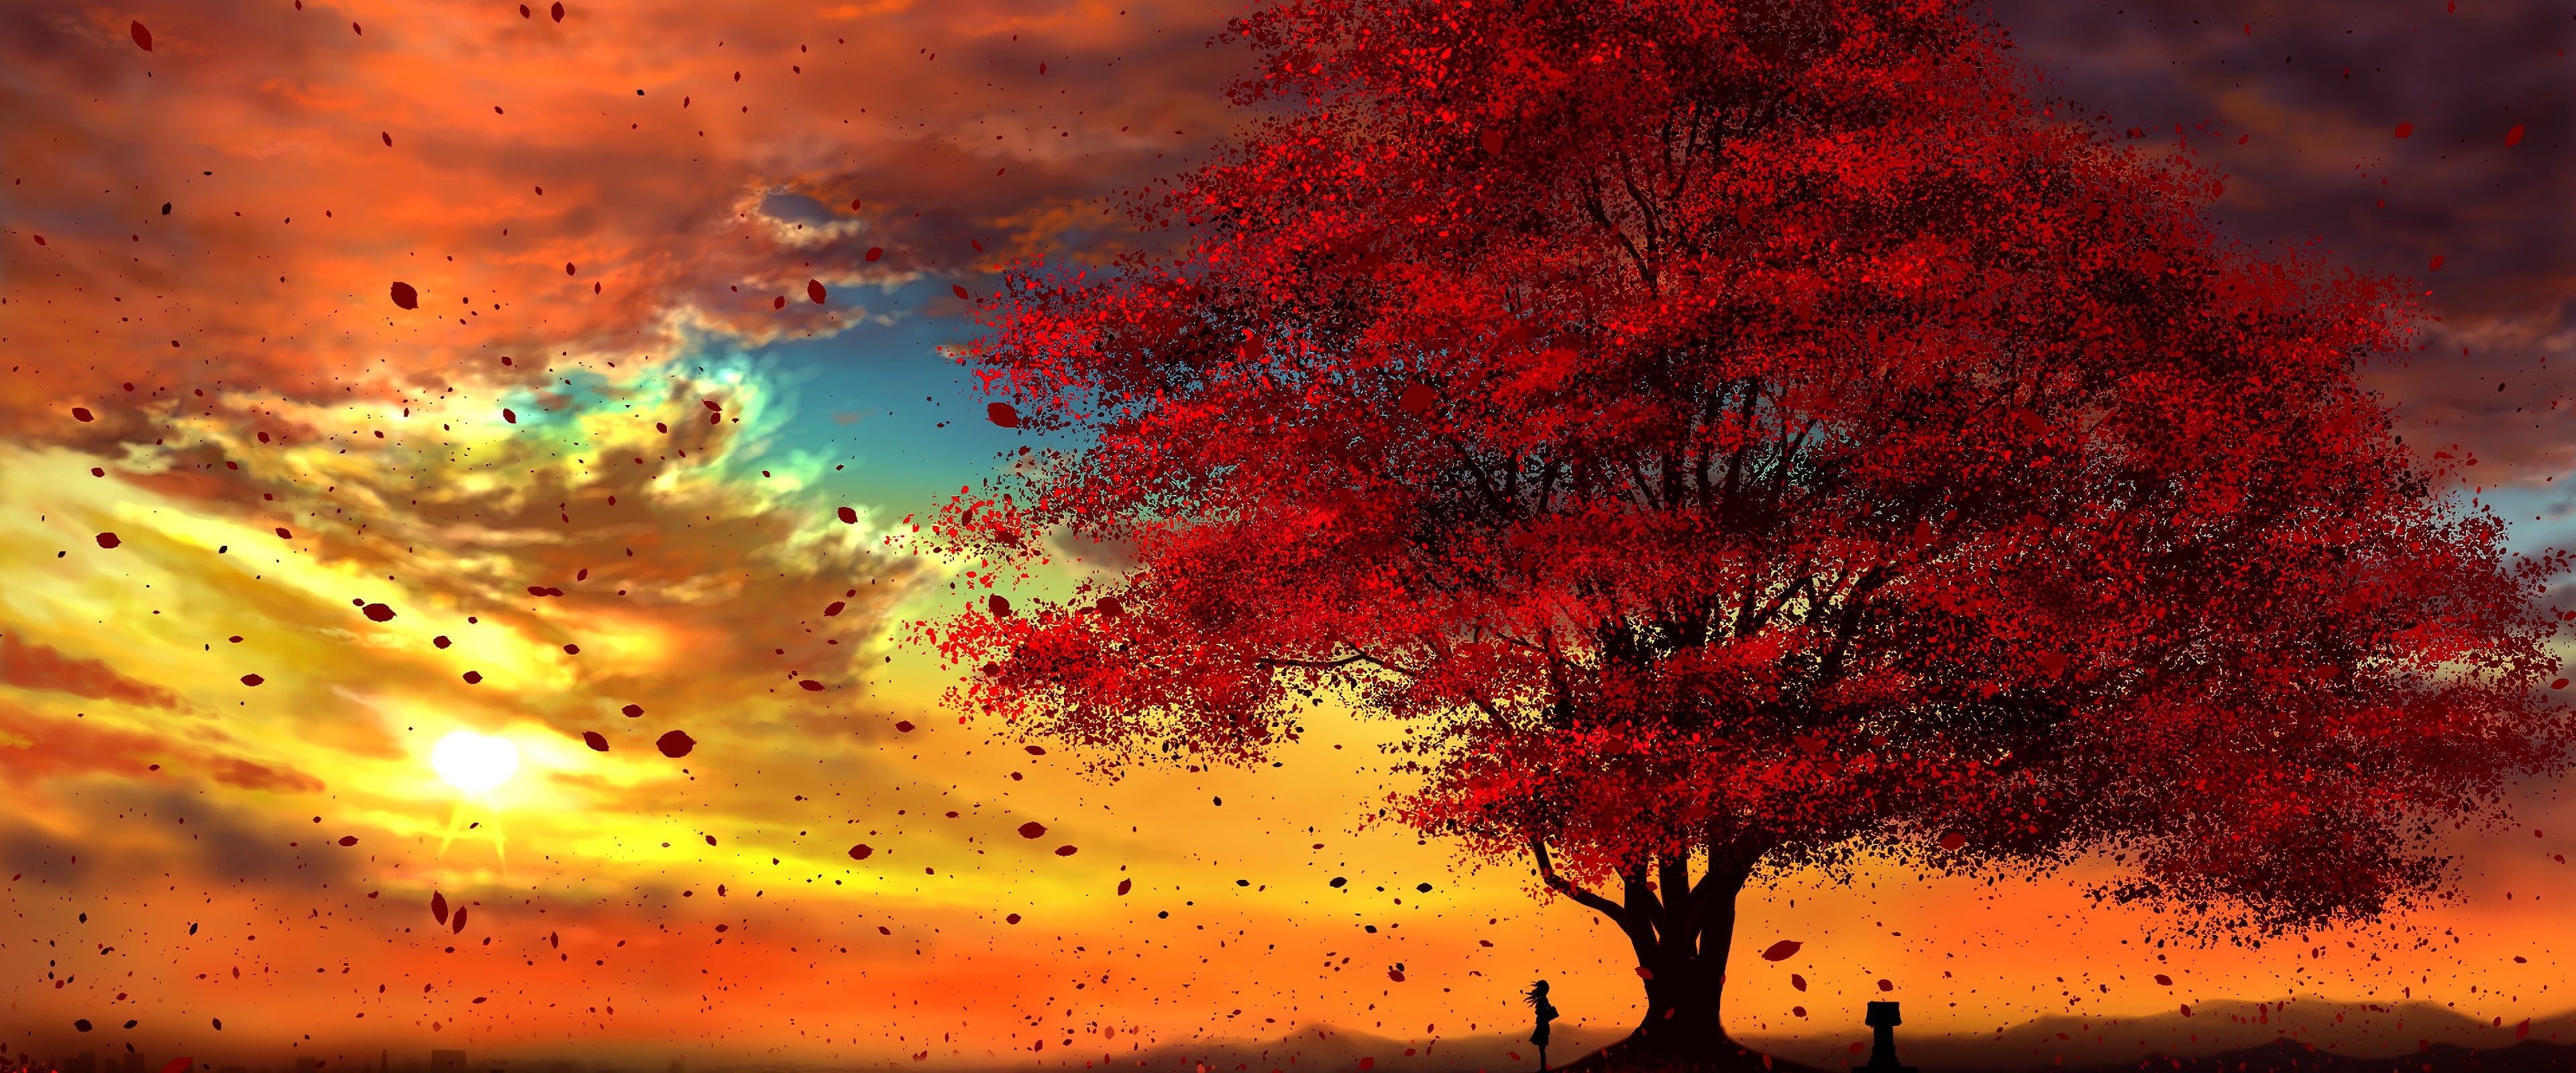 Anime Fall Images Browse 1858 Stock Photos  Vectors Free Download with  Trial  Shutterstock